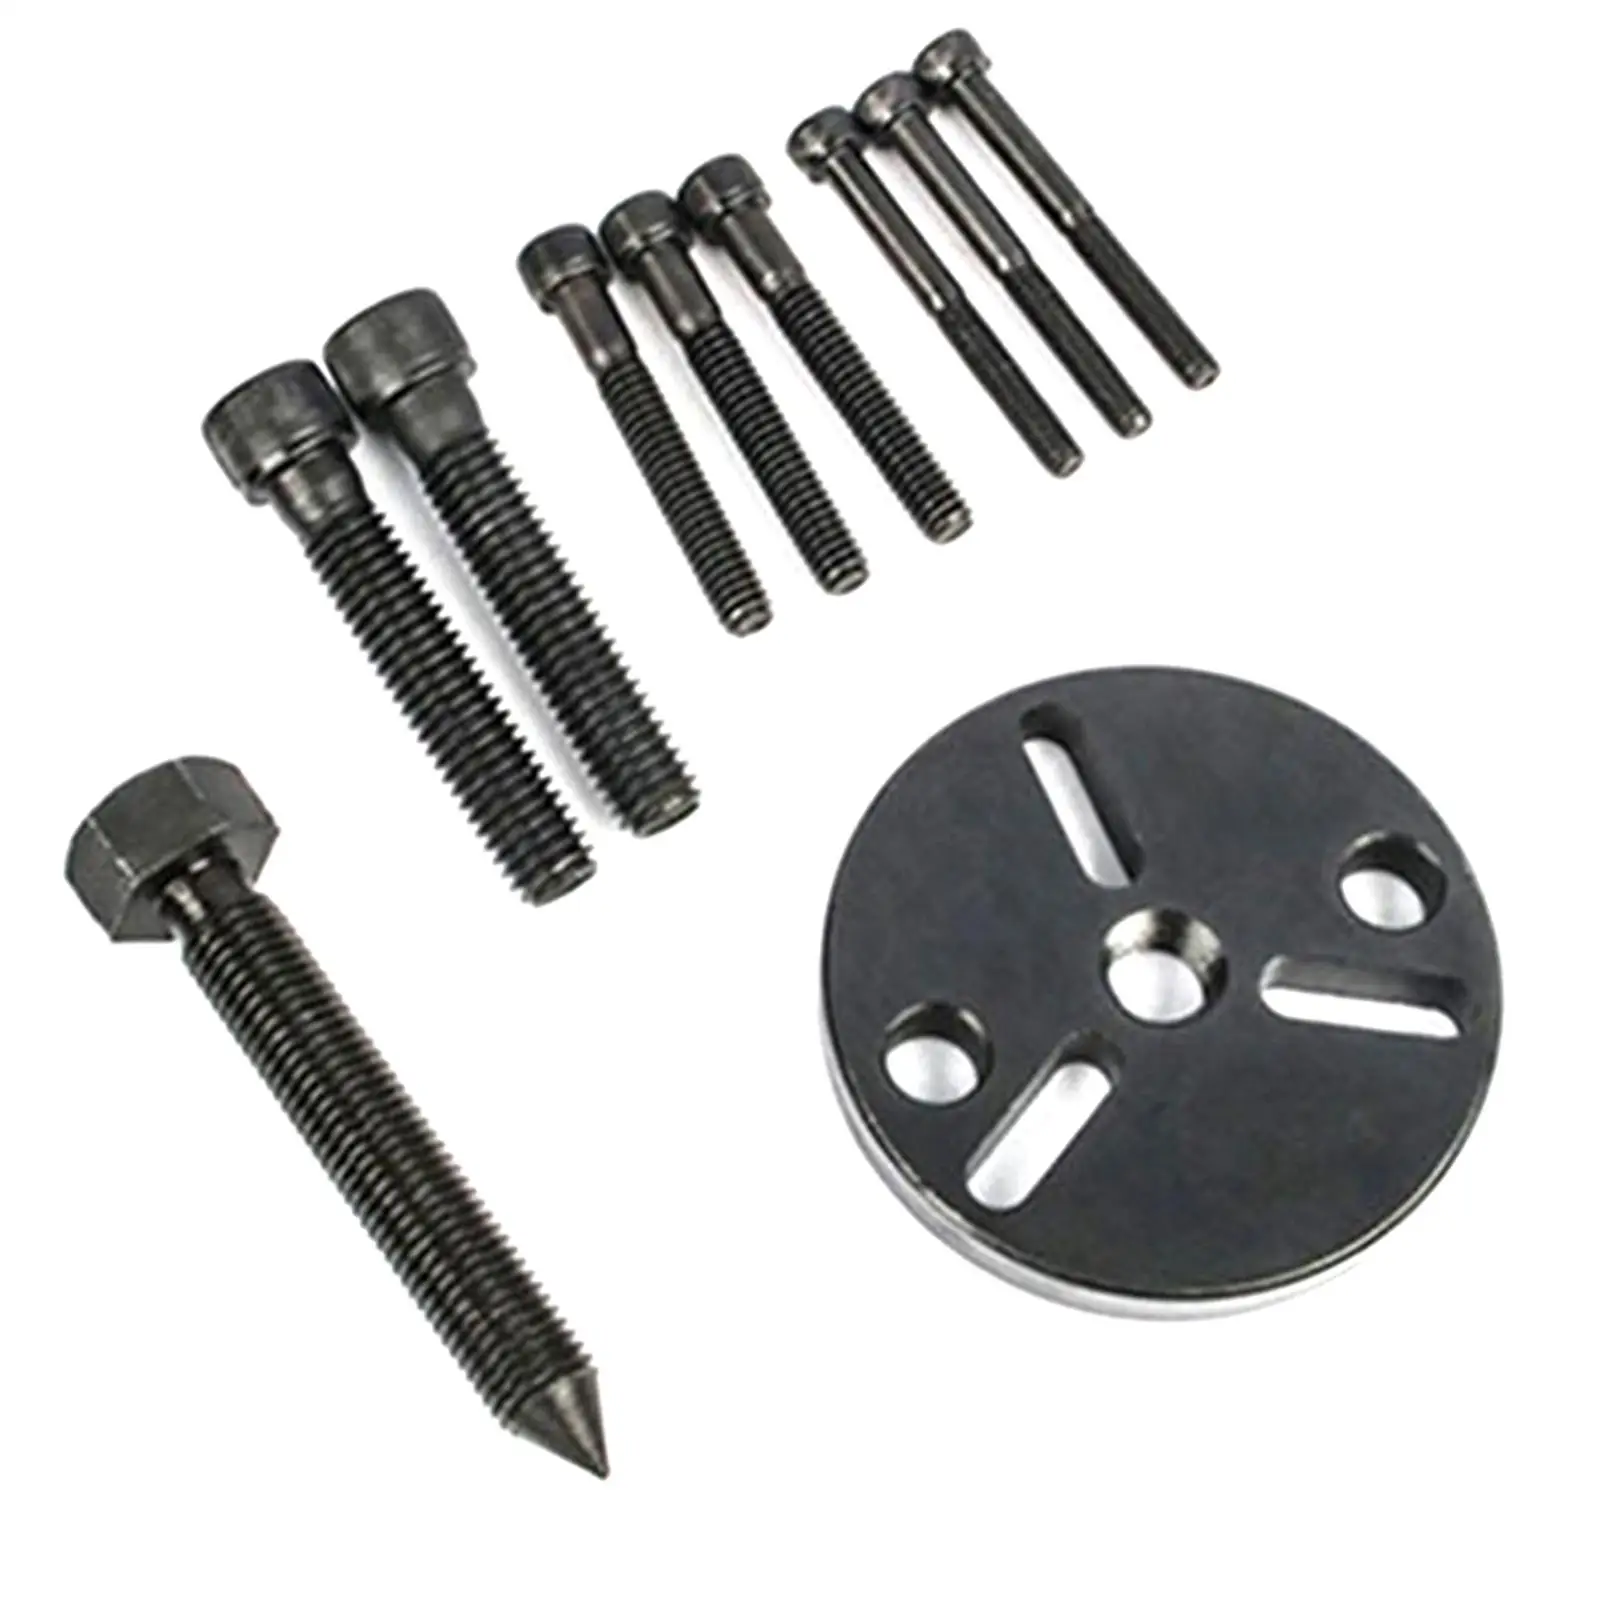 Car Air Conditioning Repair Tool Bearing Disassembly Tool Time Saving Steel Compressor Clutch Remover Kit for Various Cars